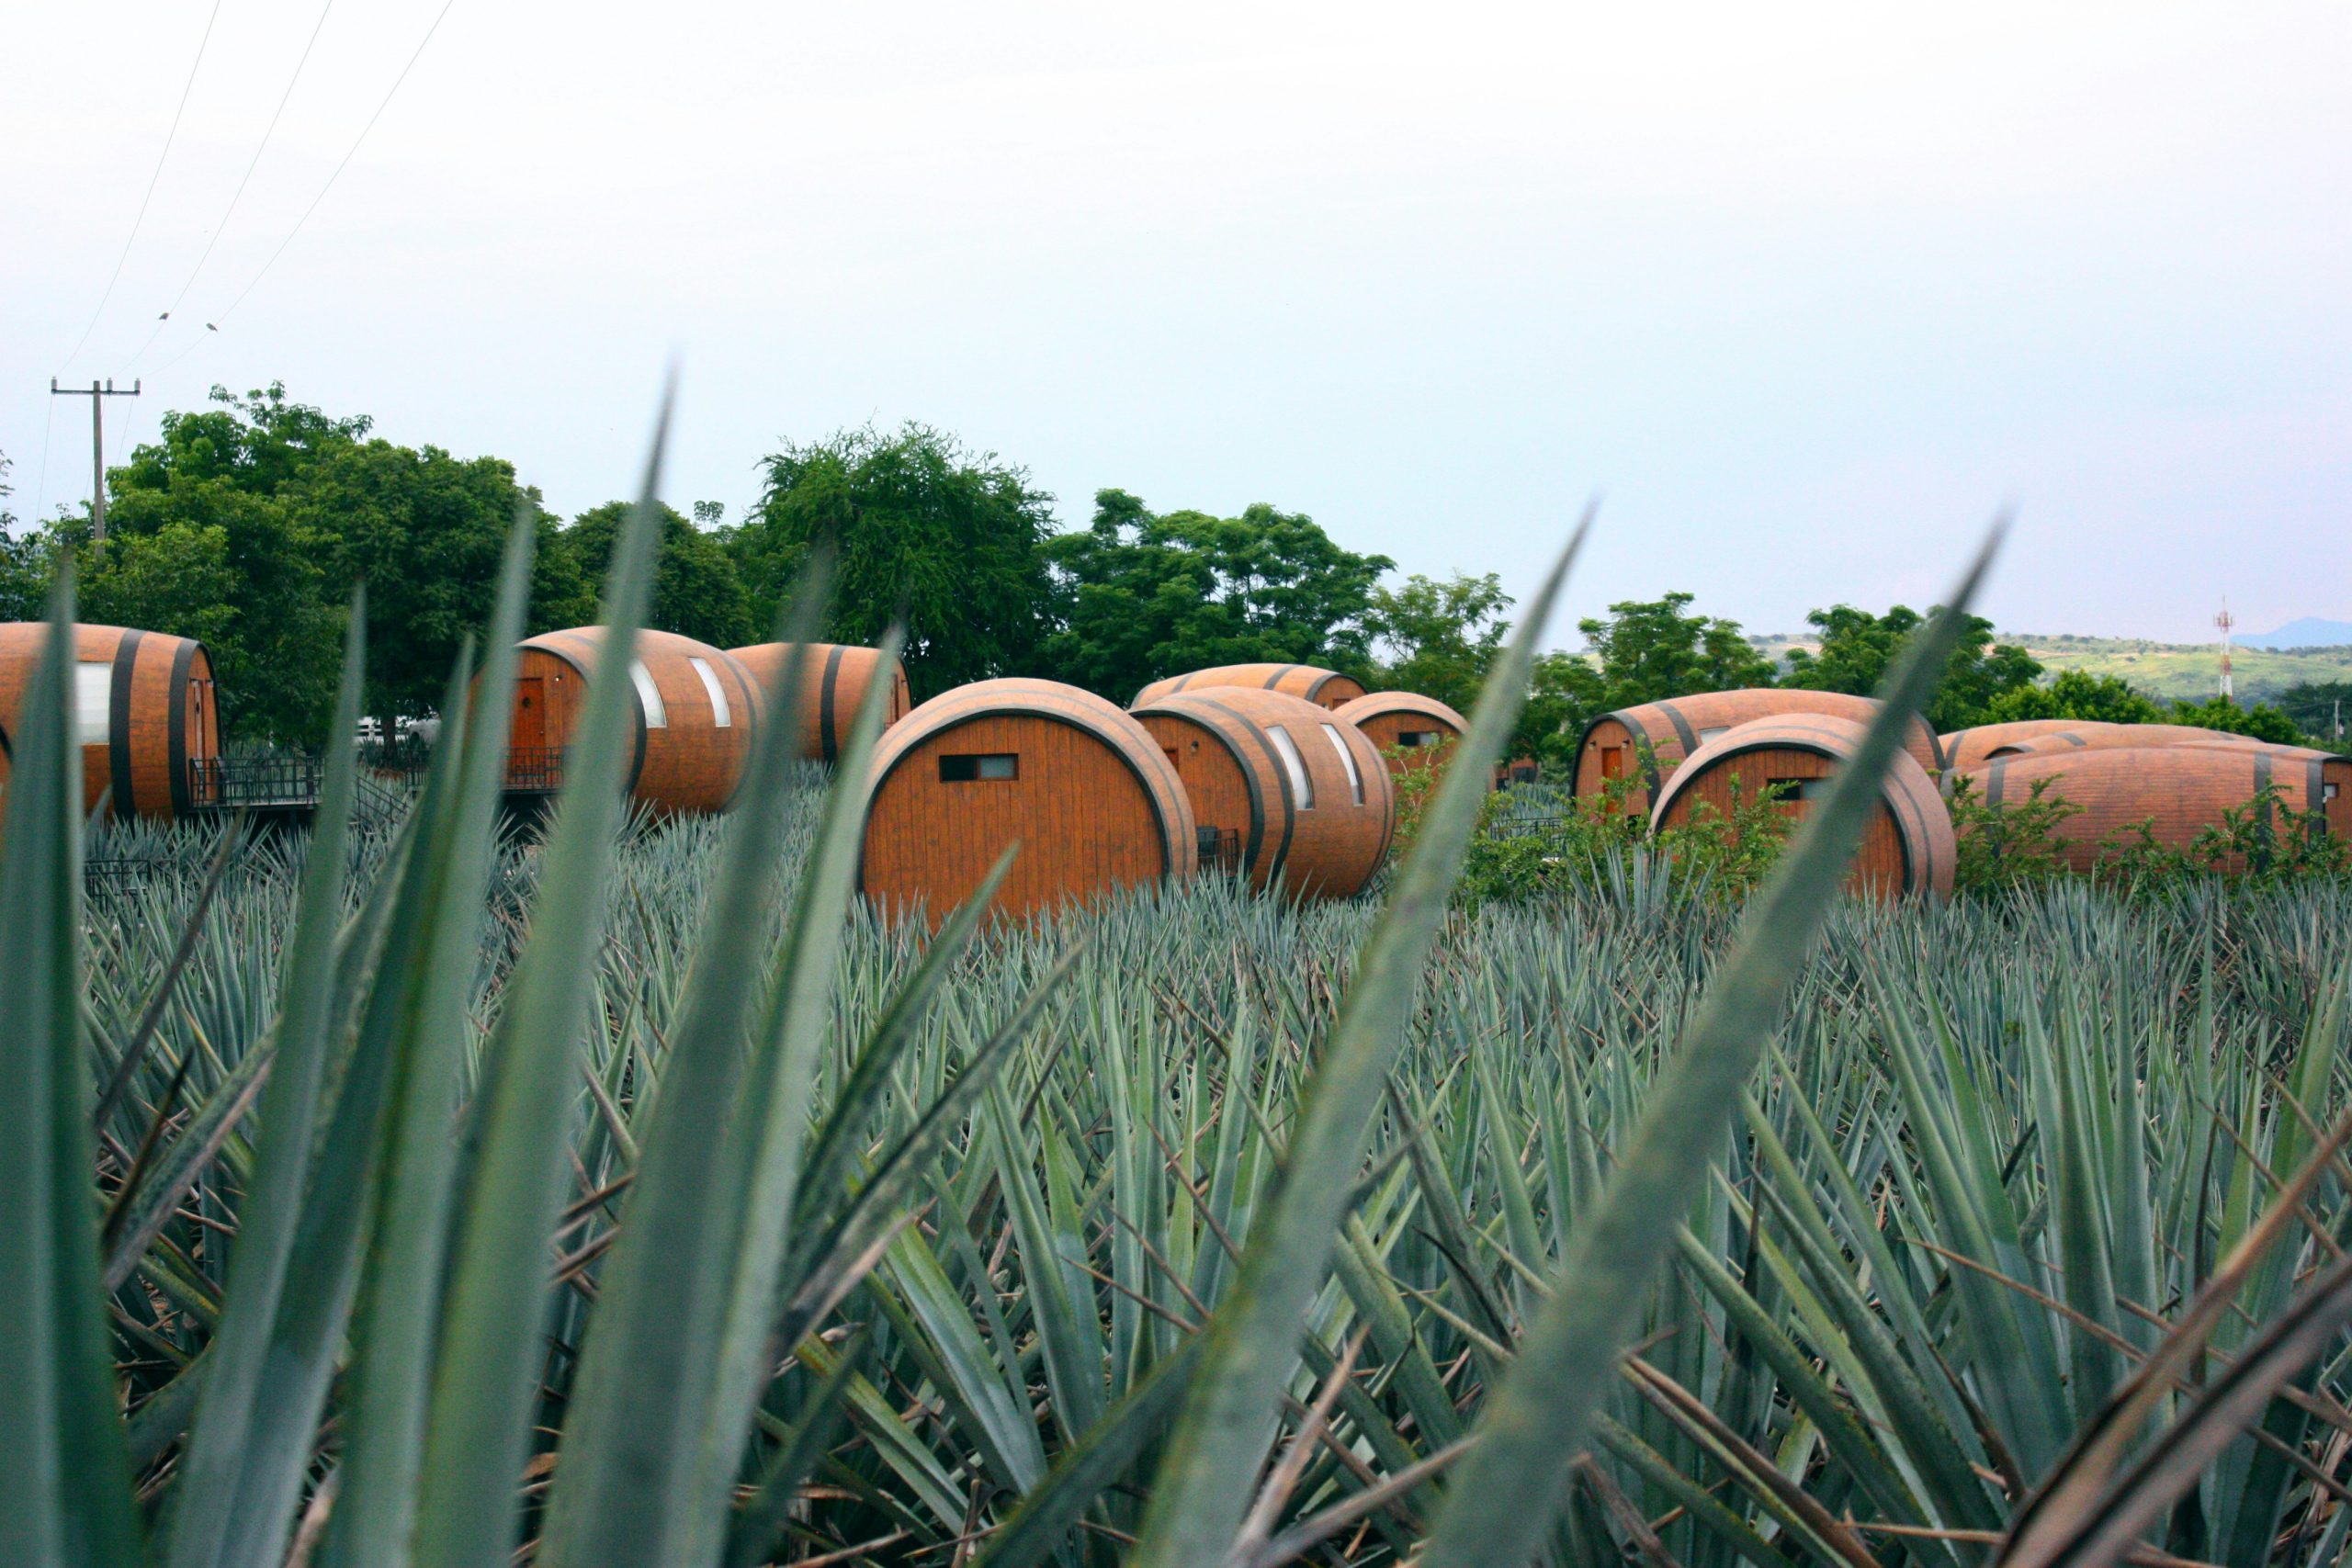 Tequila tasting in Mexico